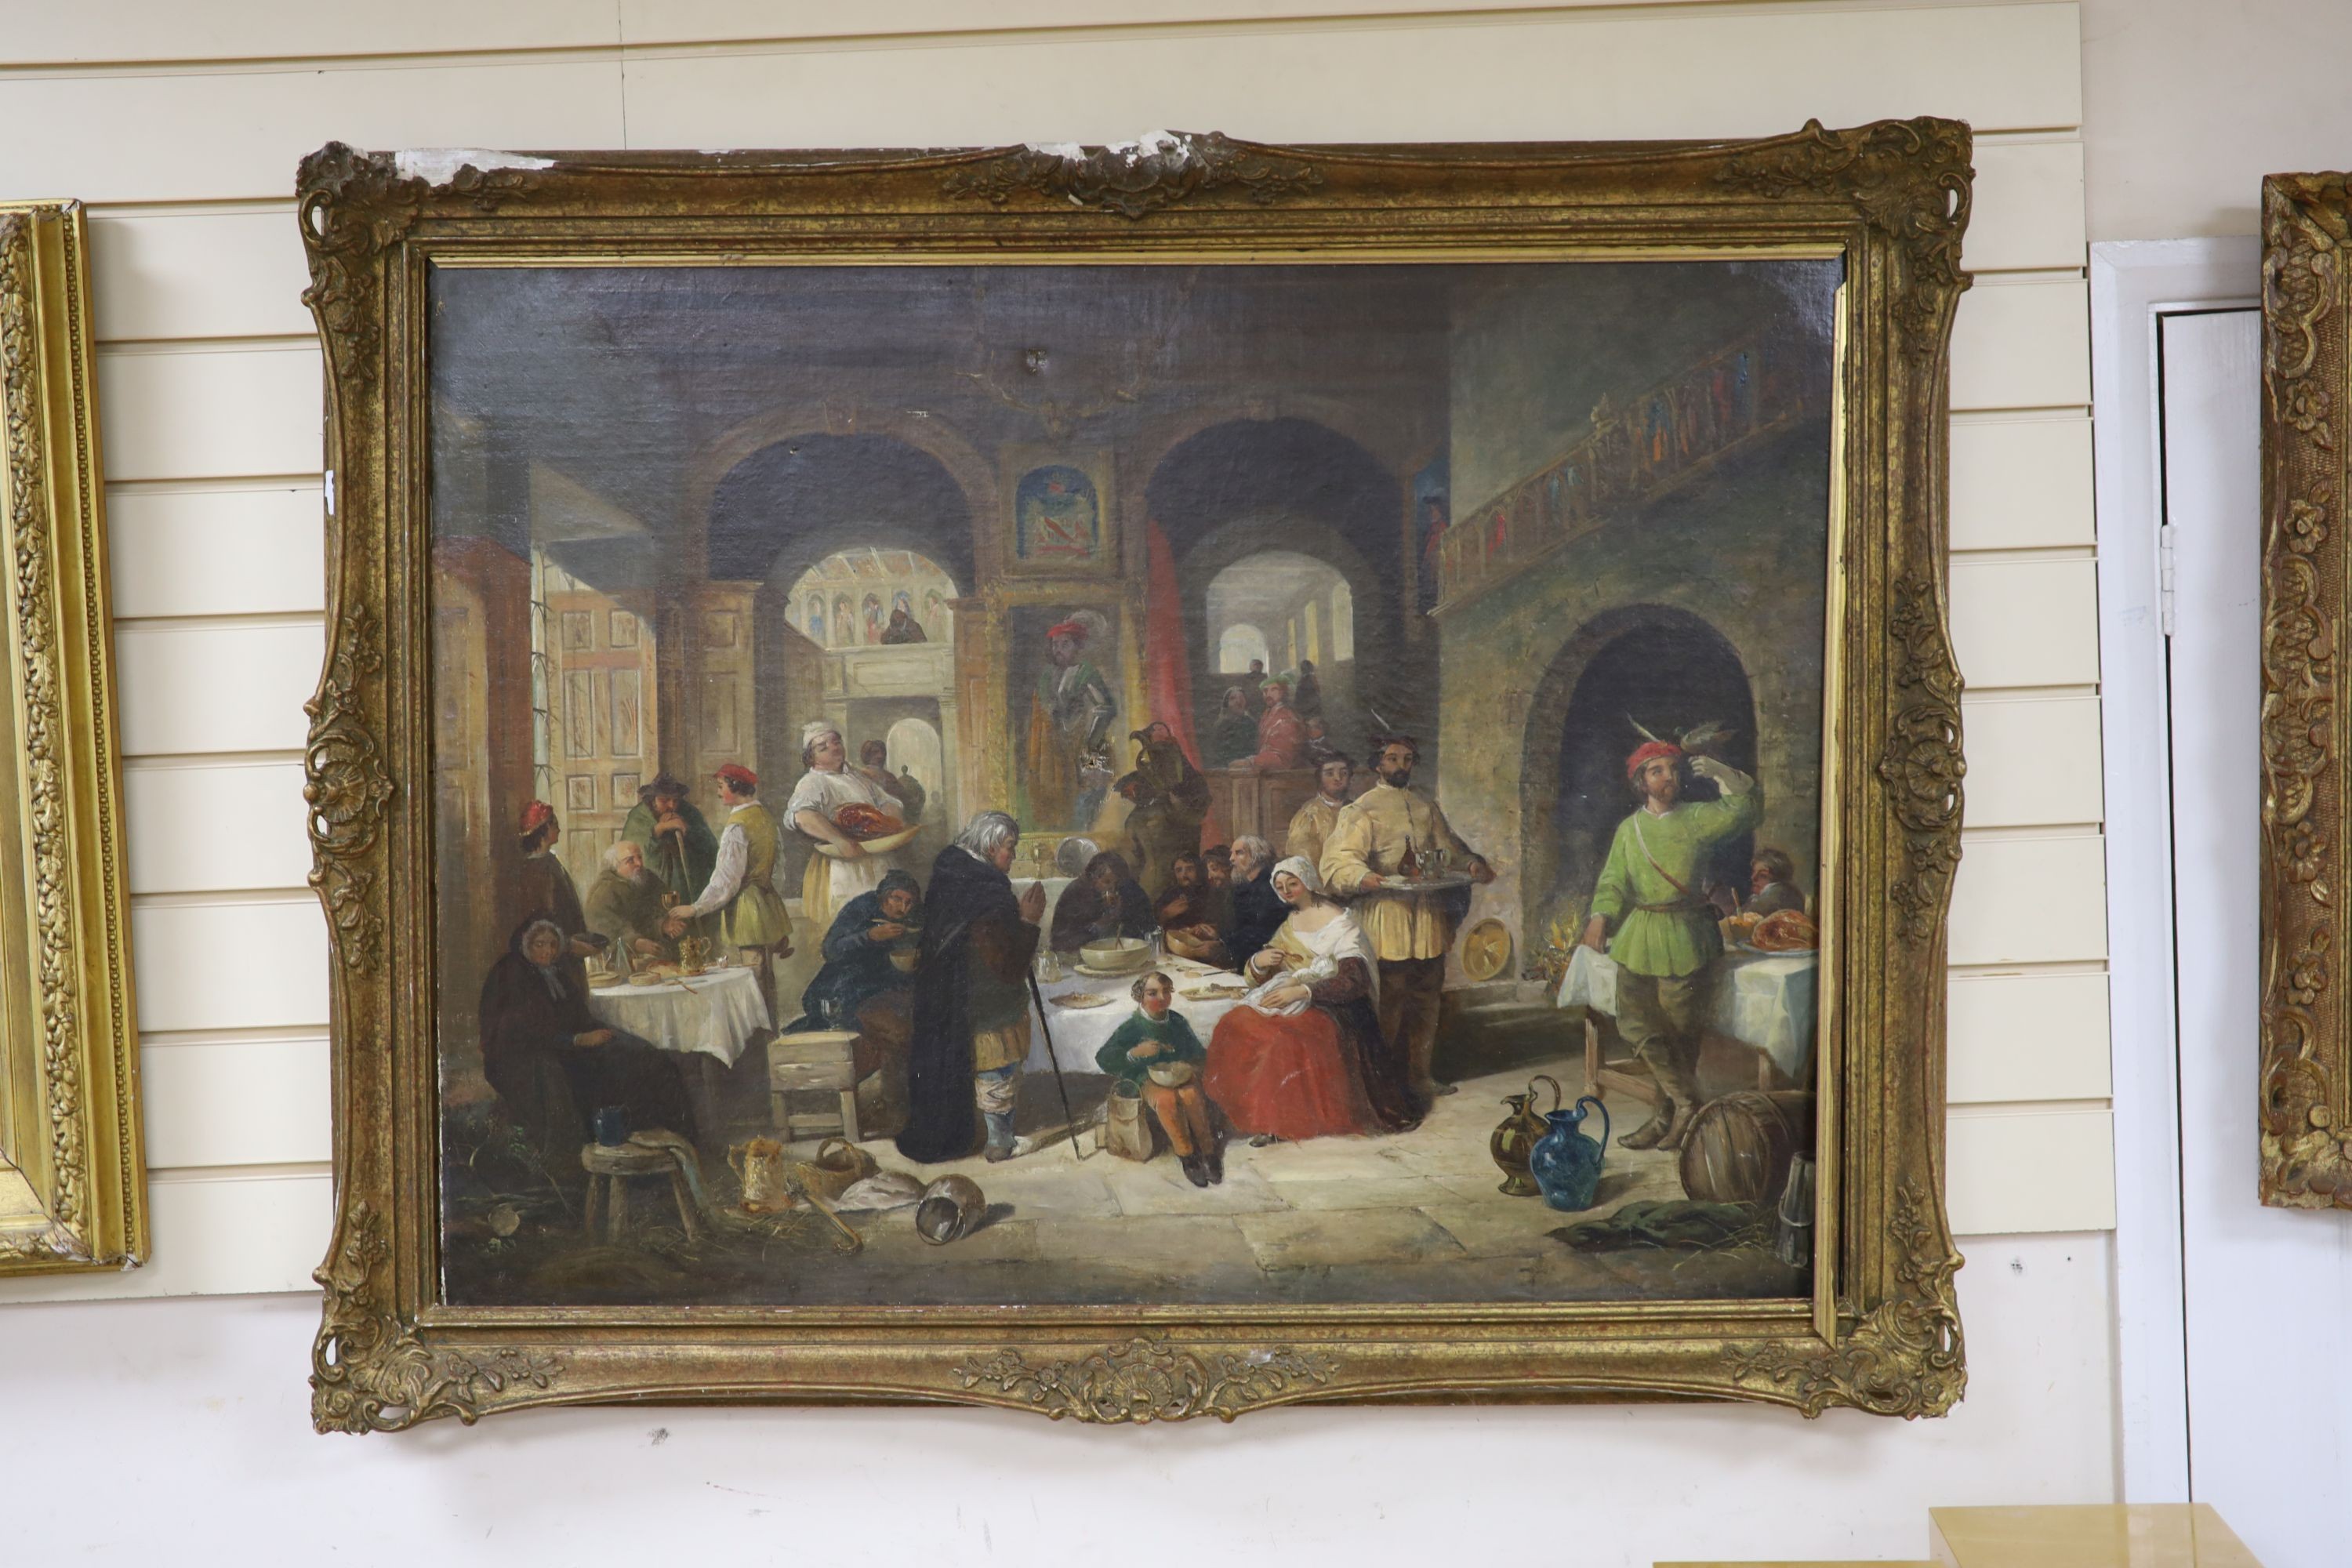 After David Wilkie, oil on canvas, mediaeval banquet, bears signature, 74 x 100 cm.